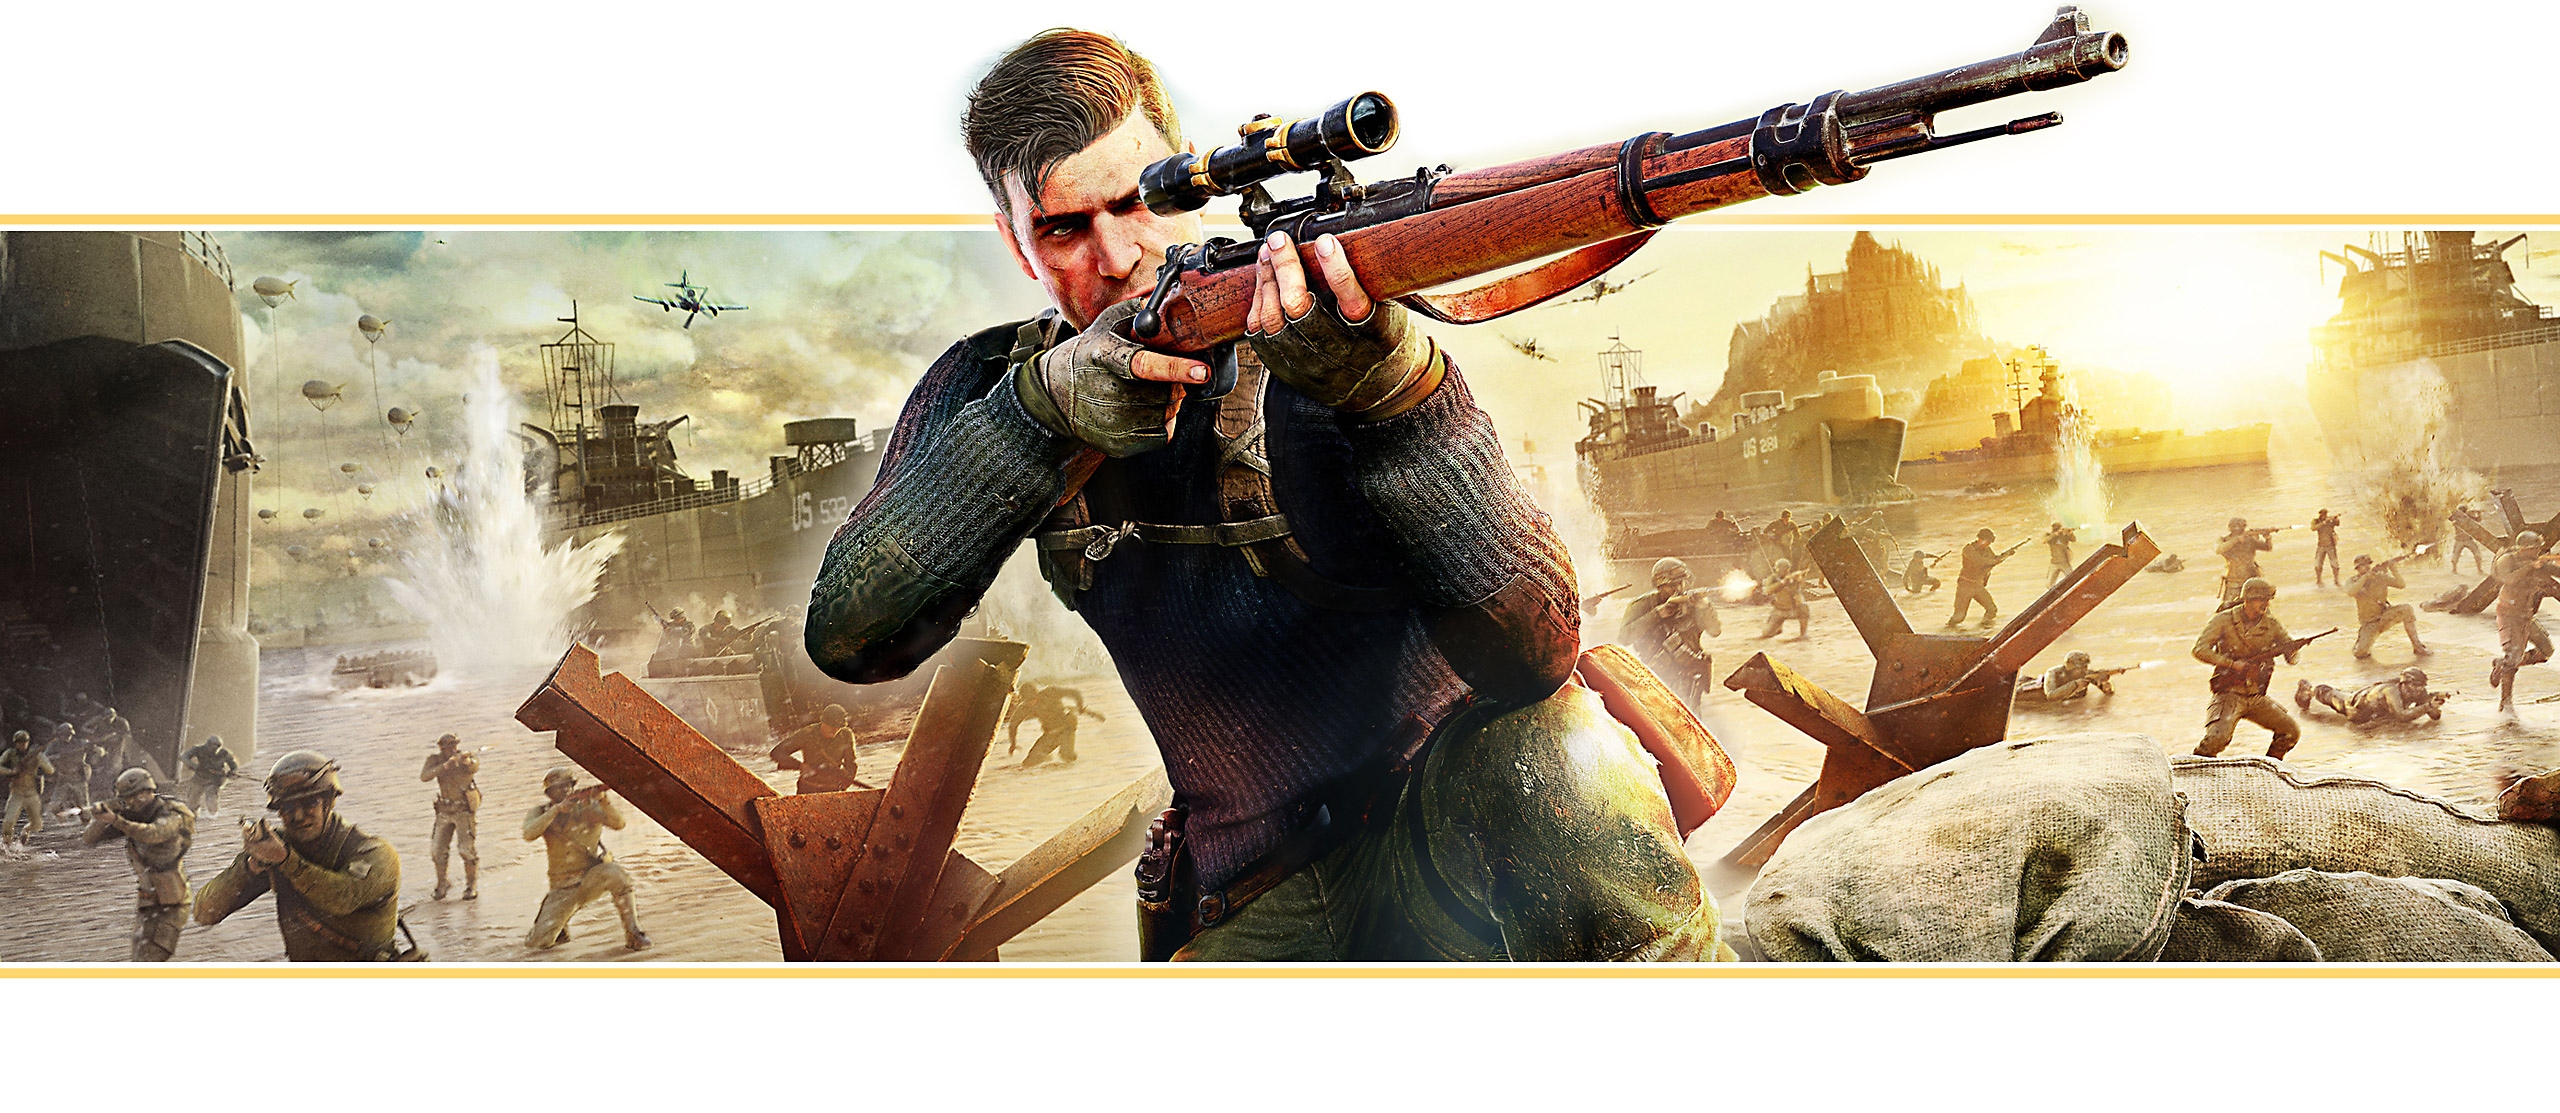 Sniper Elite 5 feature banner based on key art from the game; the main character takes aim with a sniper rifle